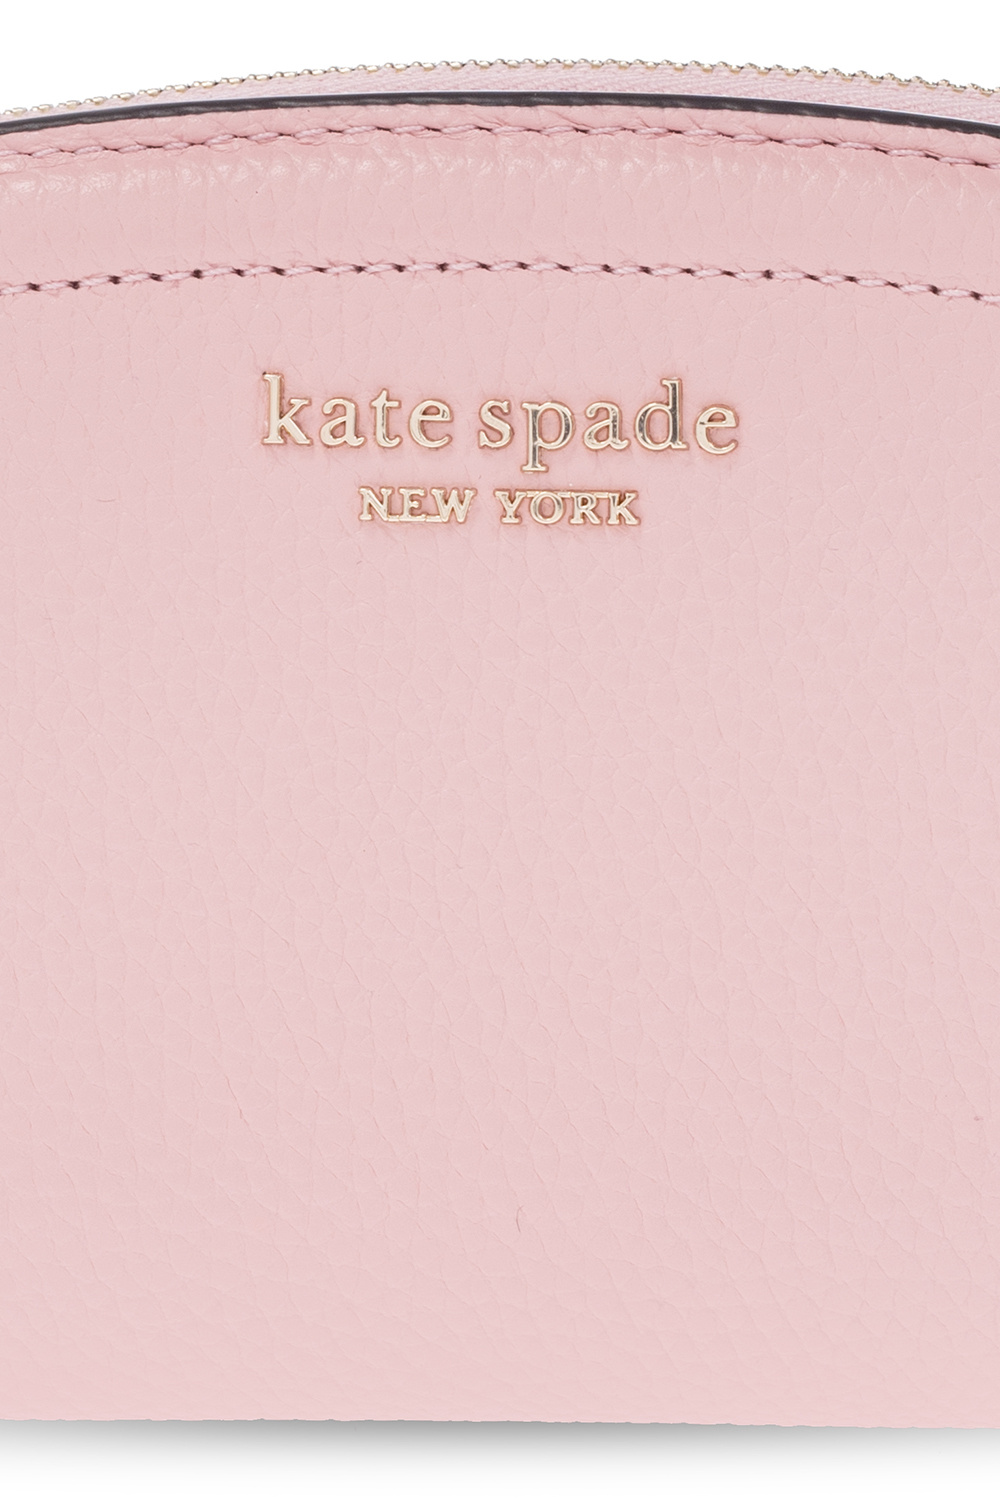 Kate Spade Choose your location